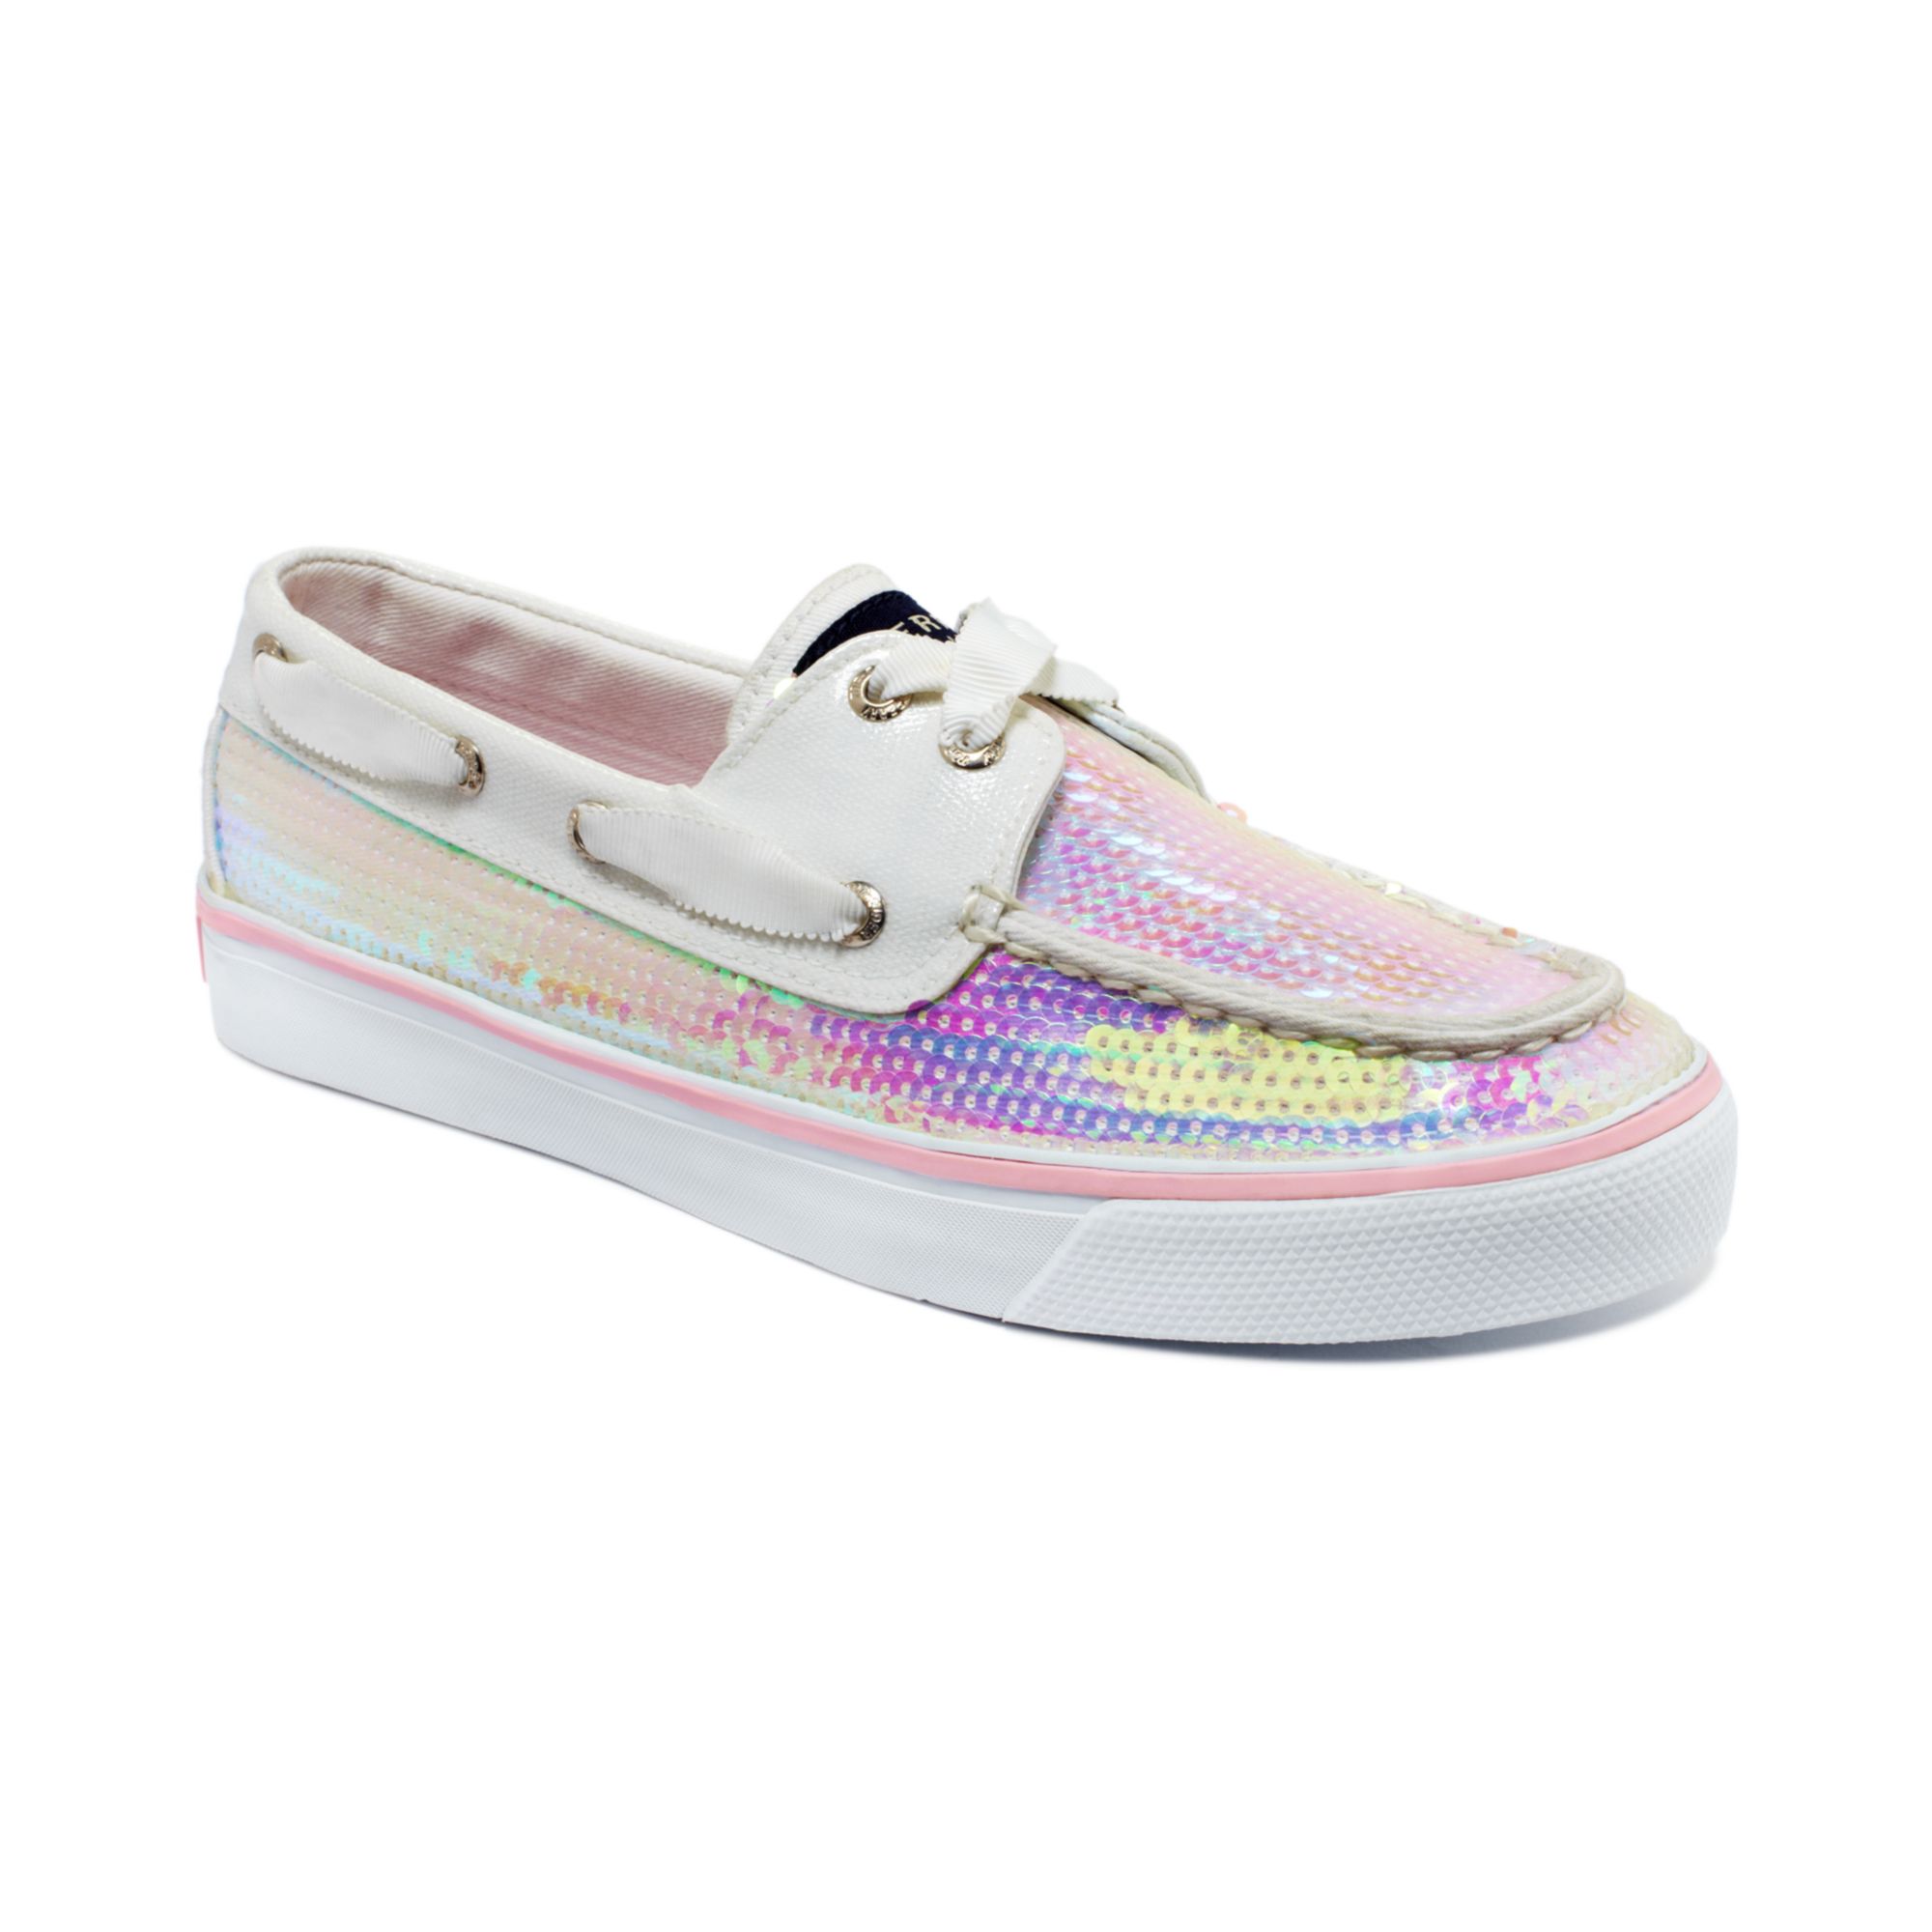 Sperry Top-Sider Bahama Boat Shoes in White | Lyst